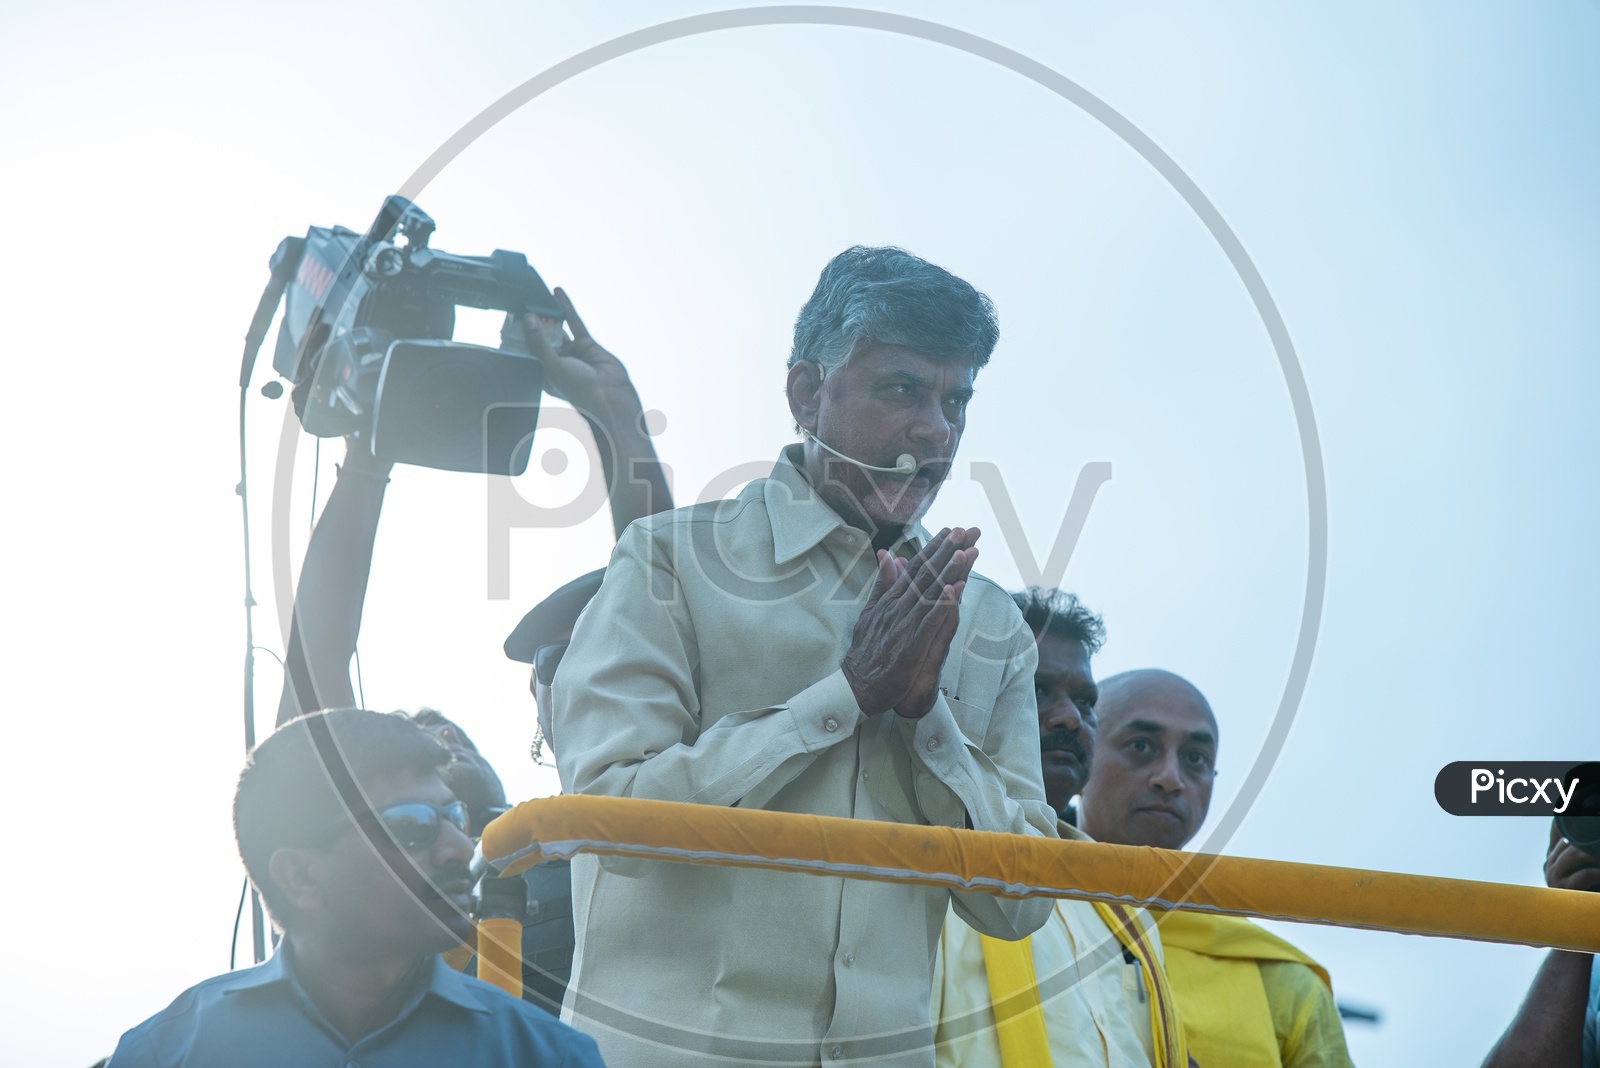 Nara Chnadra Babu Naidu Speaking On a Road Rally Sow During Election Campaign